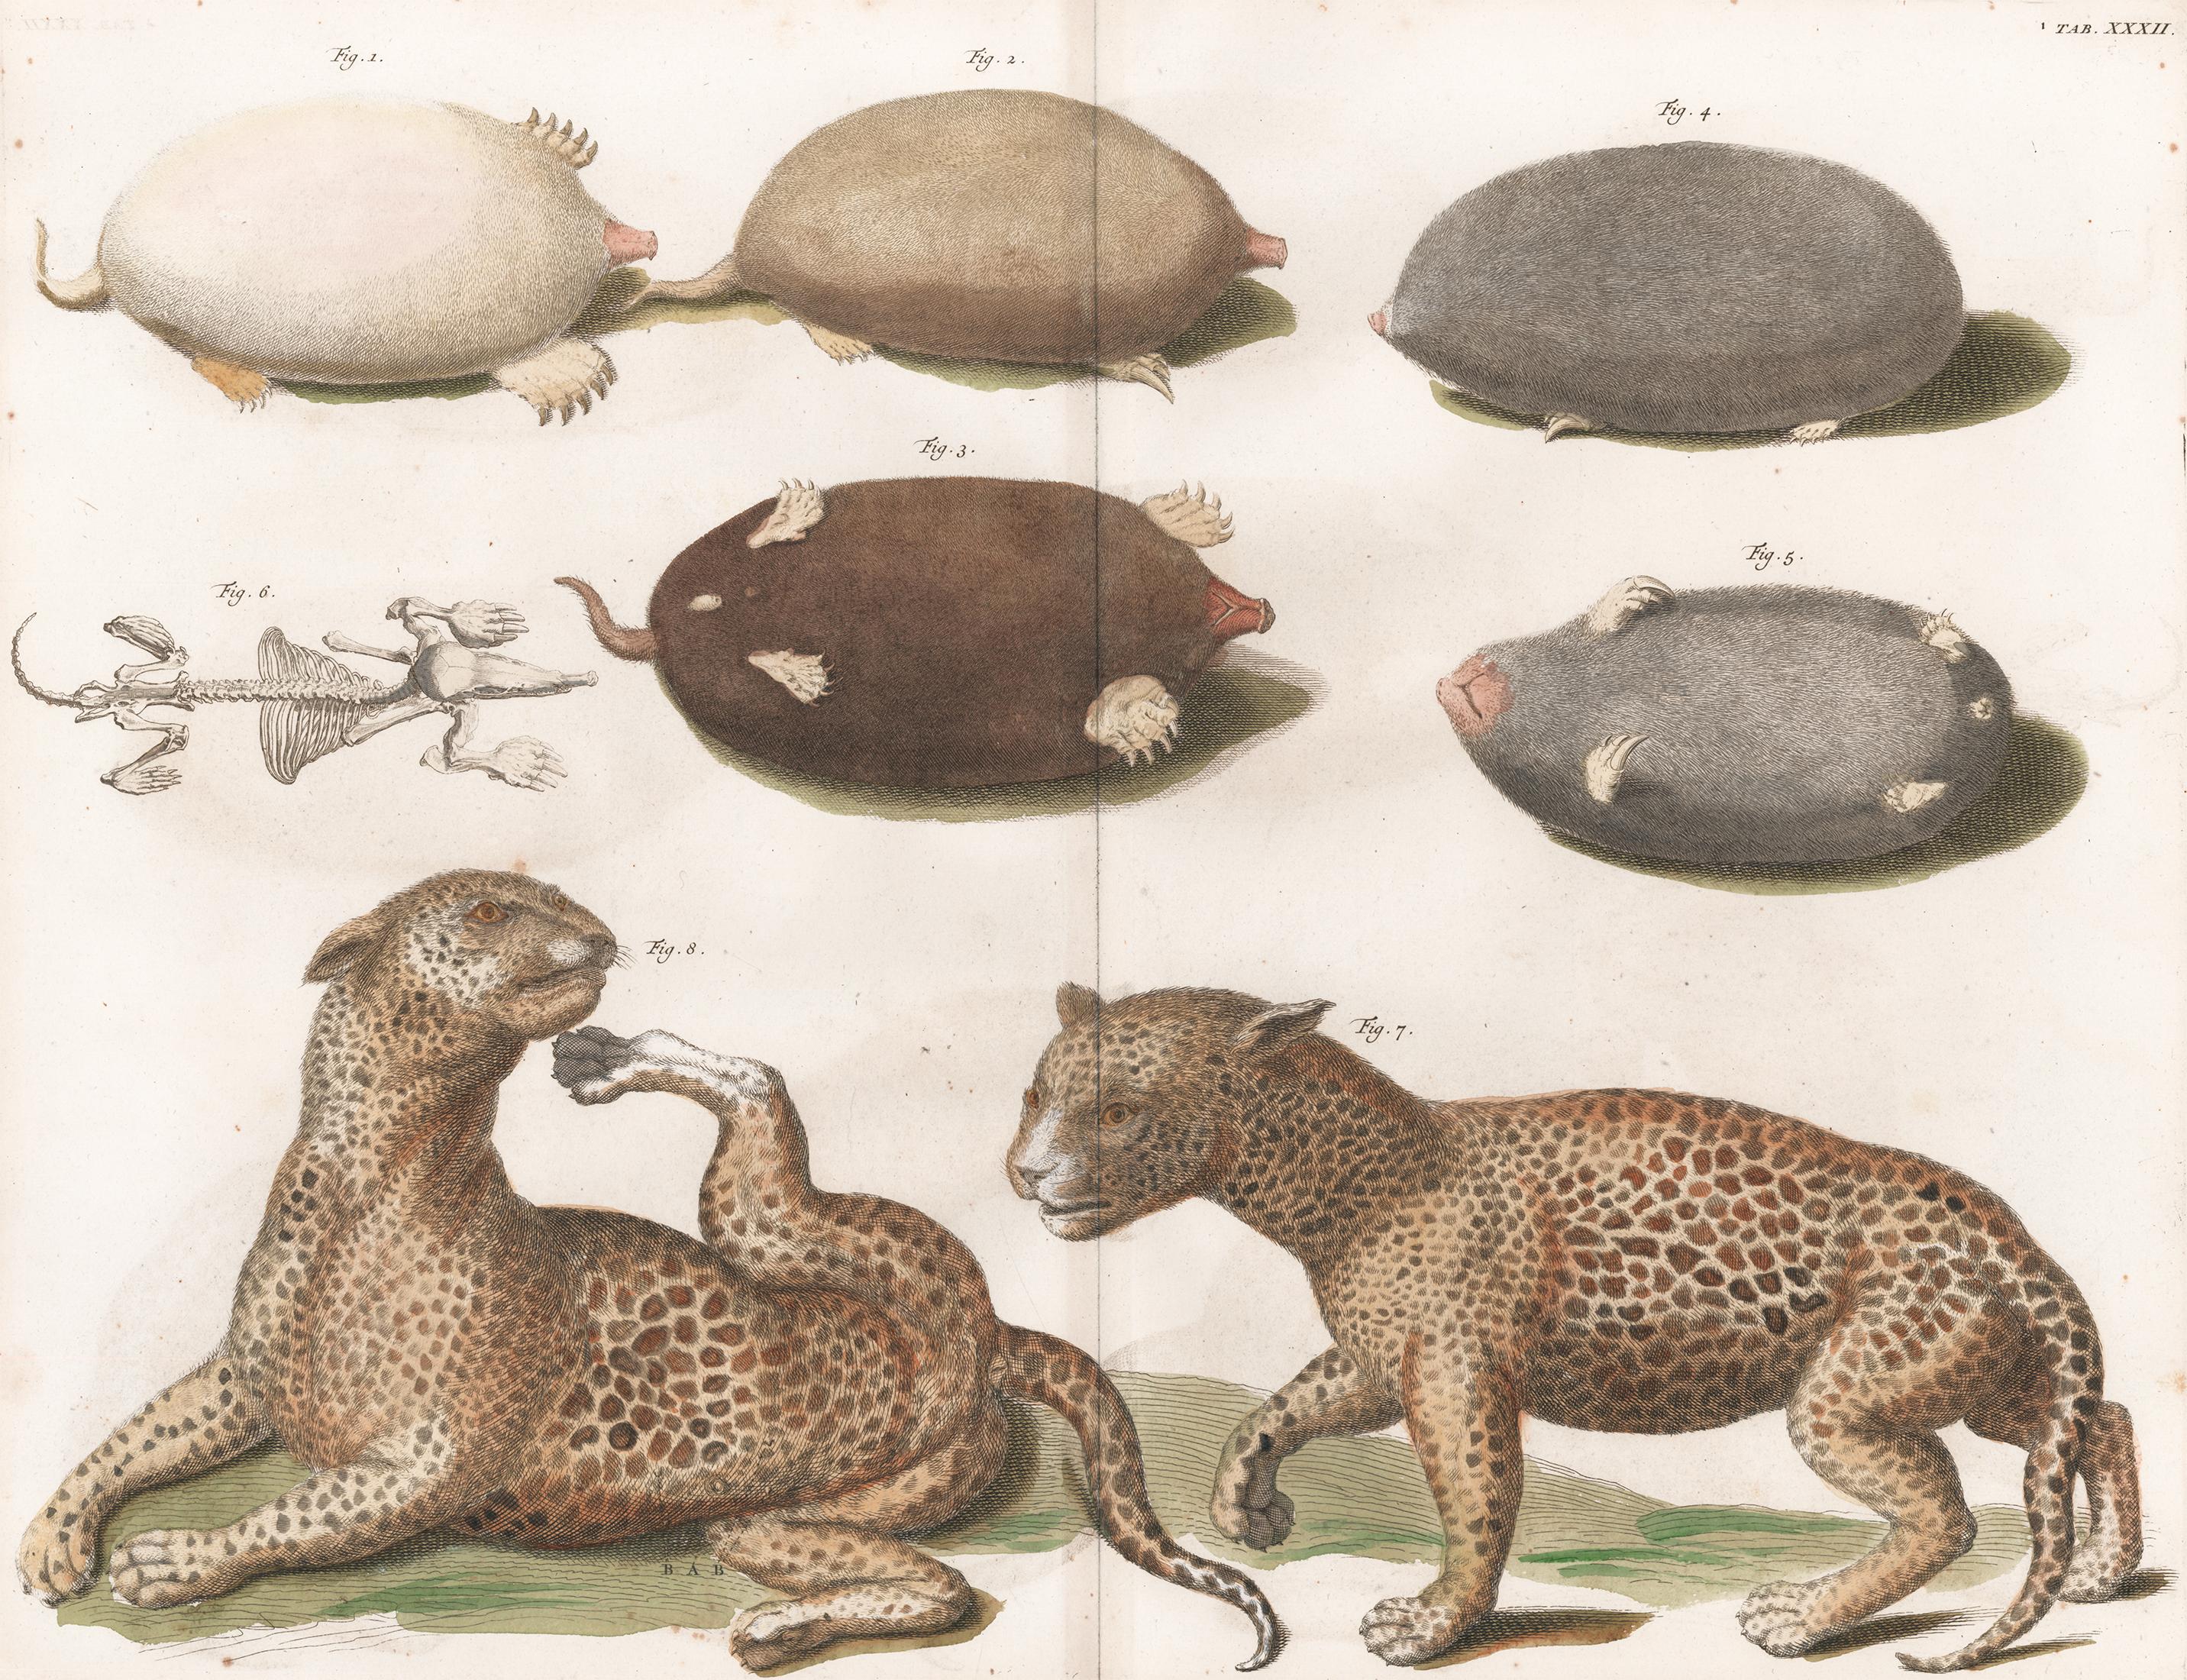 Leopards and Mole Engraving